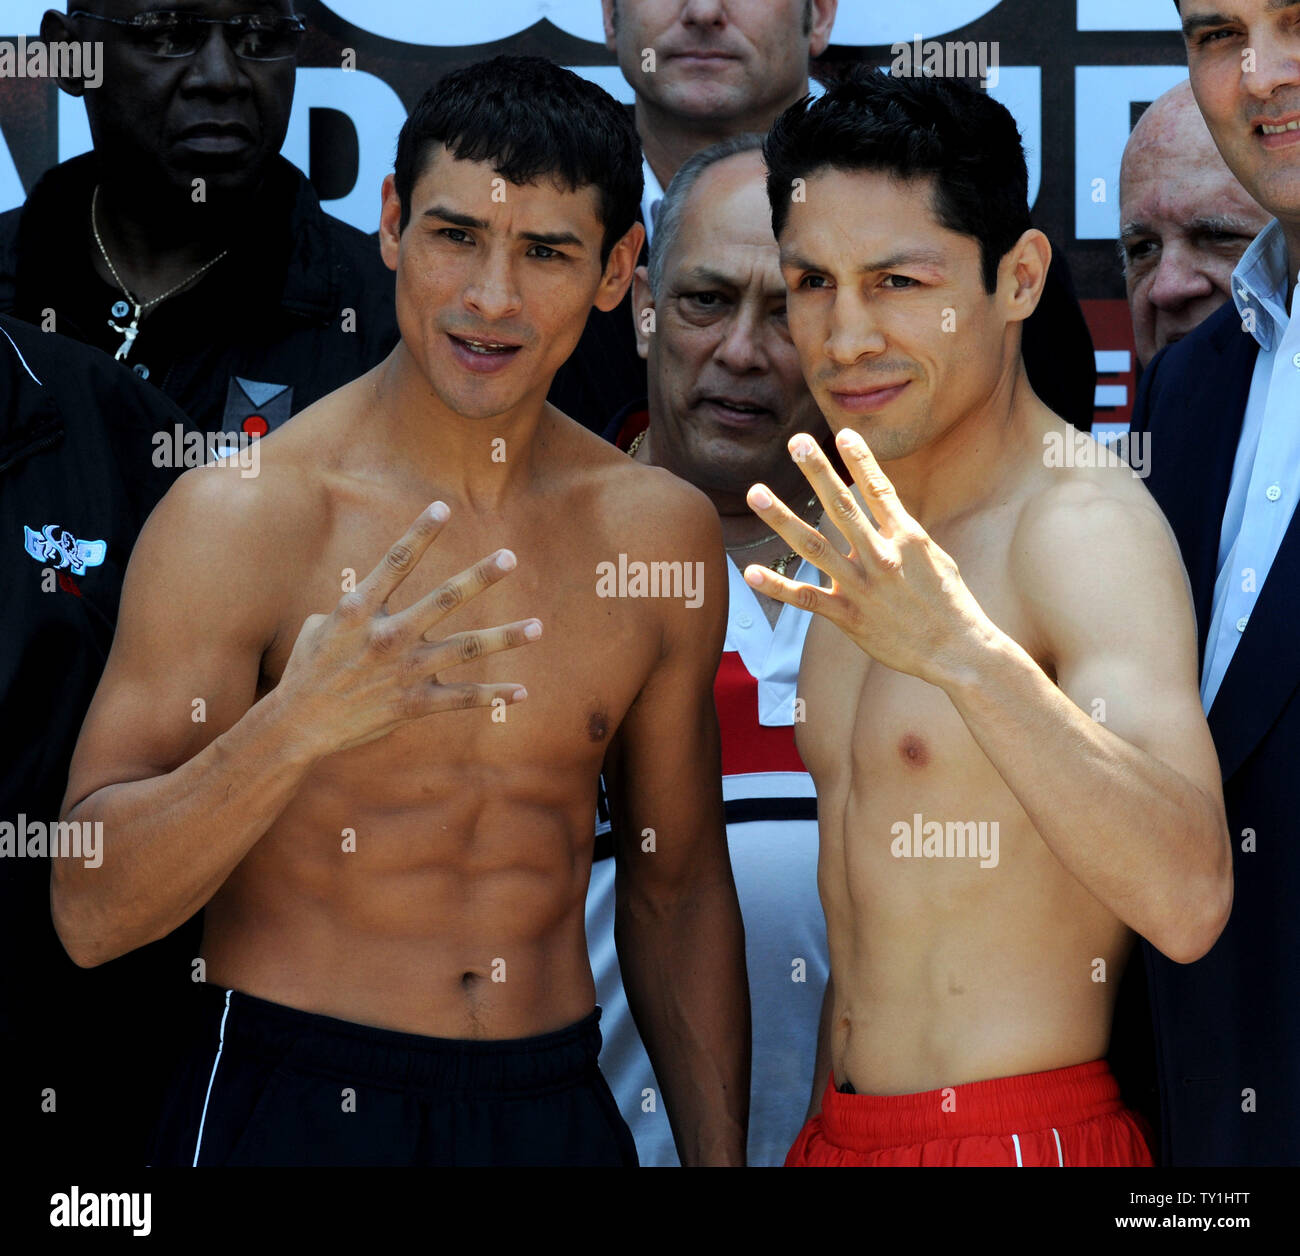 Rafael Marquez (L) and Israel Vazquez mug for the cameras after they each weighed in at 125 1/2 pounds for their fourth bout in Saturday's Showtime-televised non-title featherweight fight at Staples Center in Los Angeles on May 21, 2010.    UPI/Jim Ruymen Stock Photo